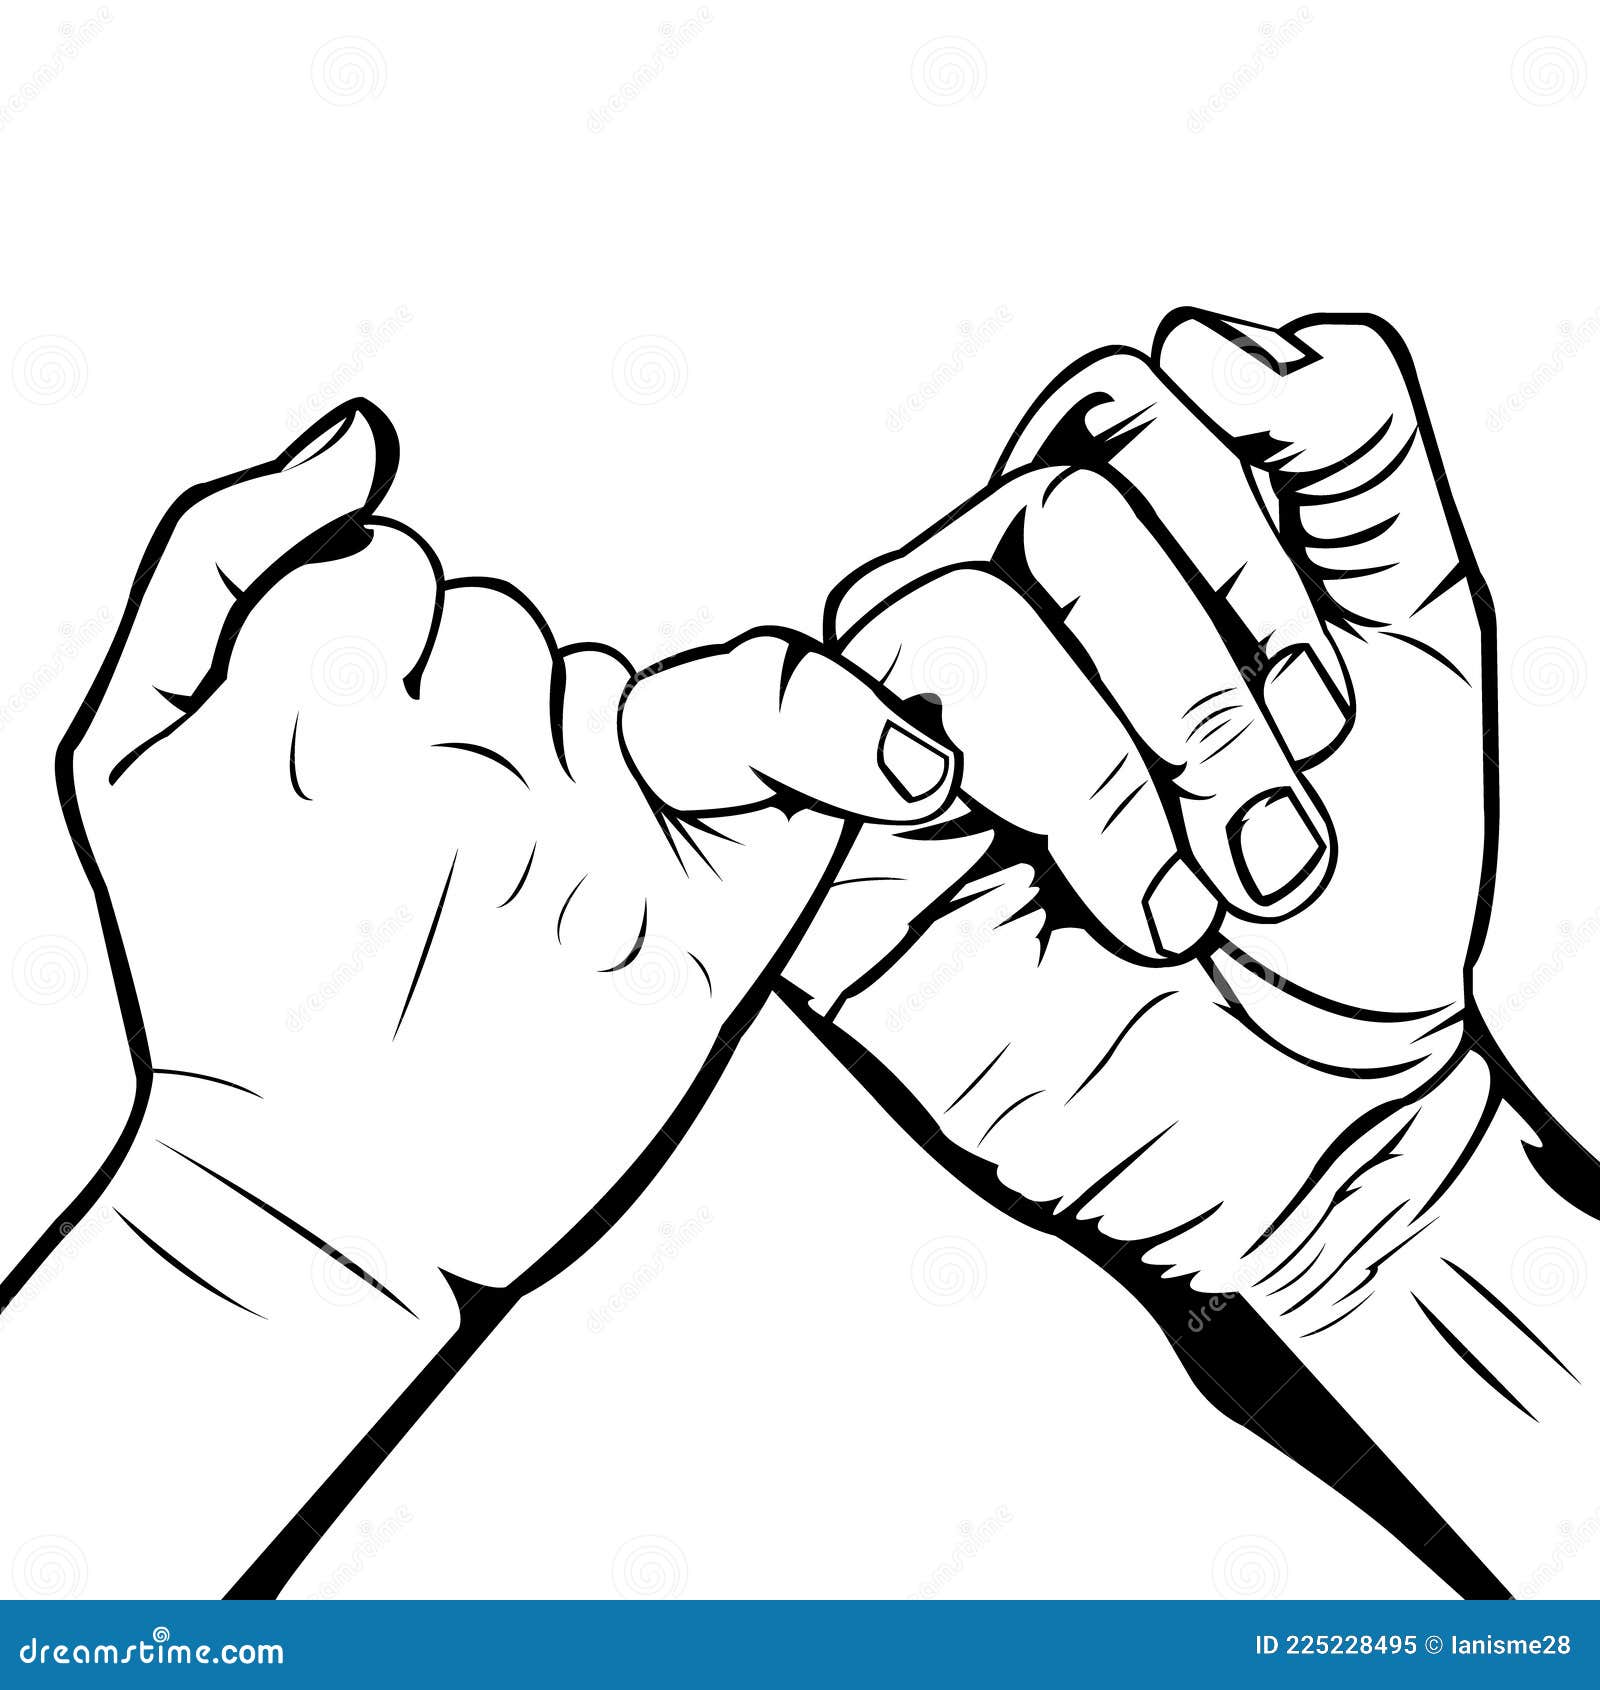 Pinky Promise Stock Illustrations 285 Pinky Promise Stock Illustrations Vectors Clipart Dreamstime